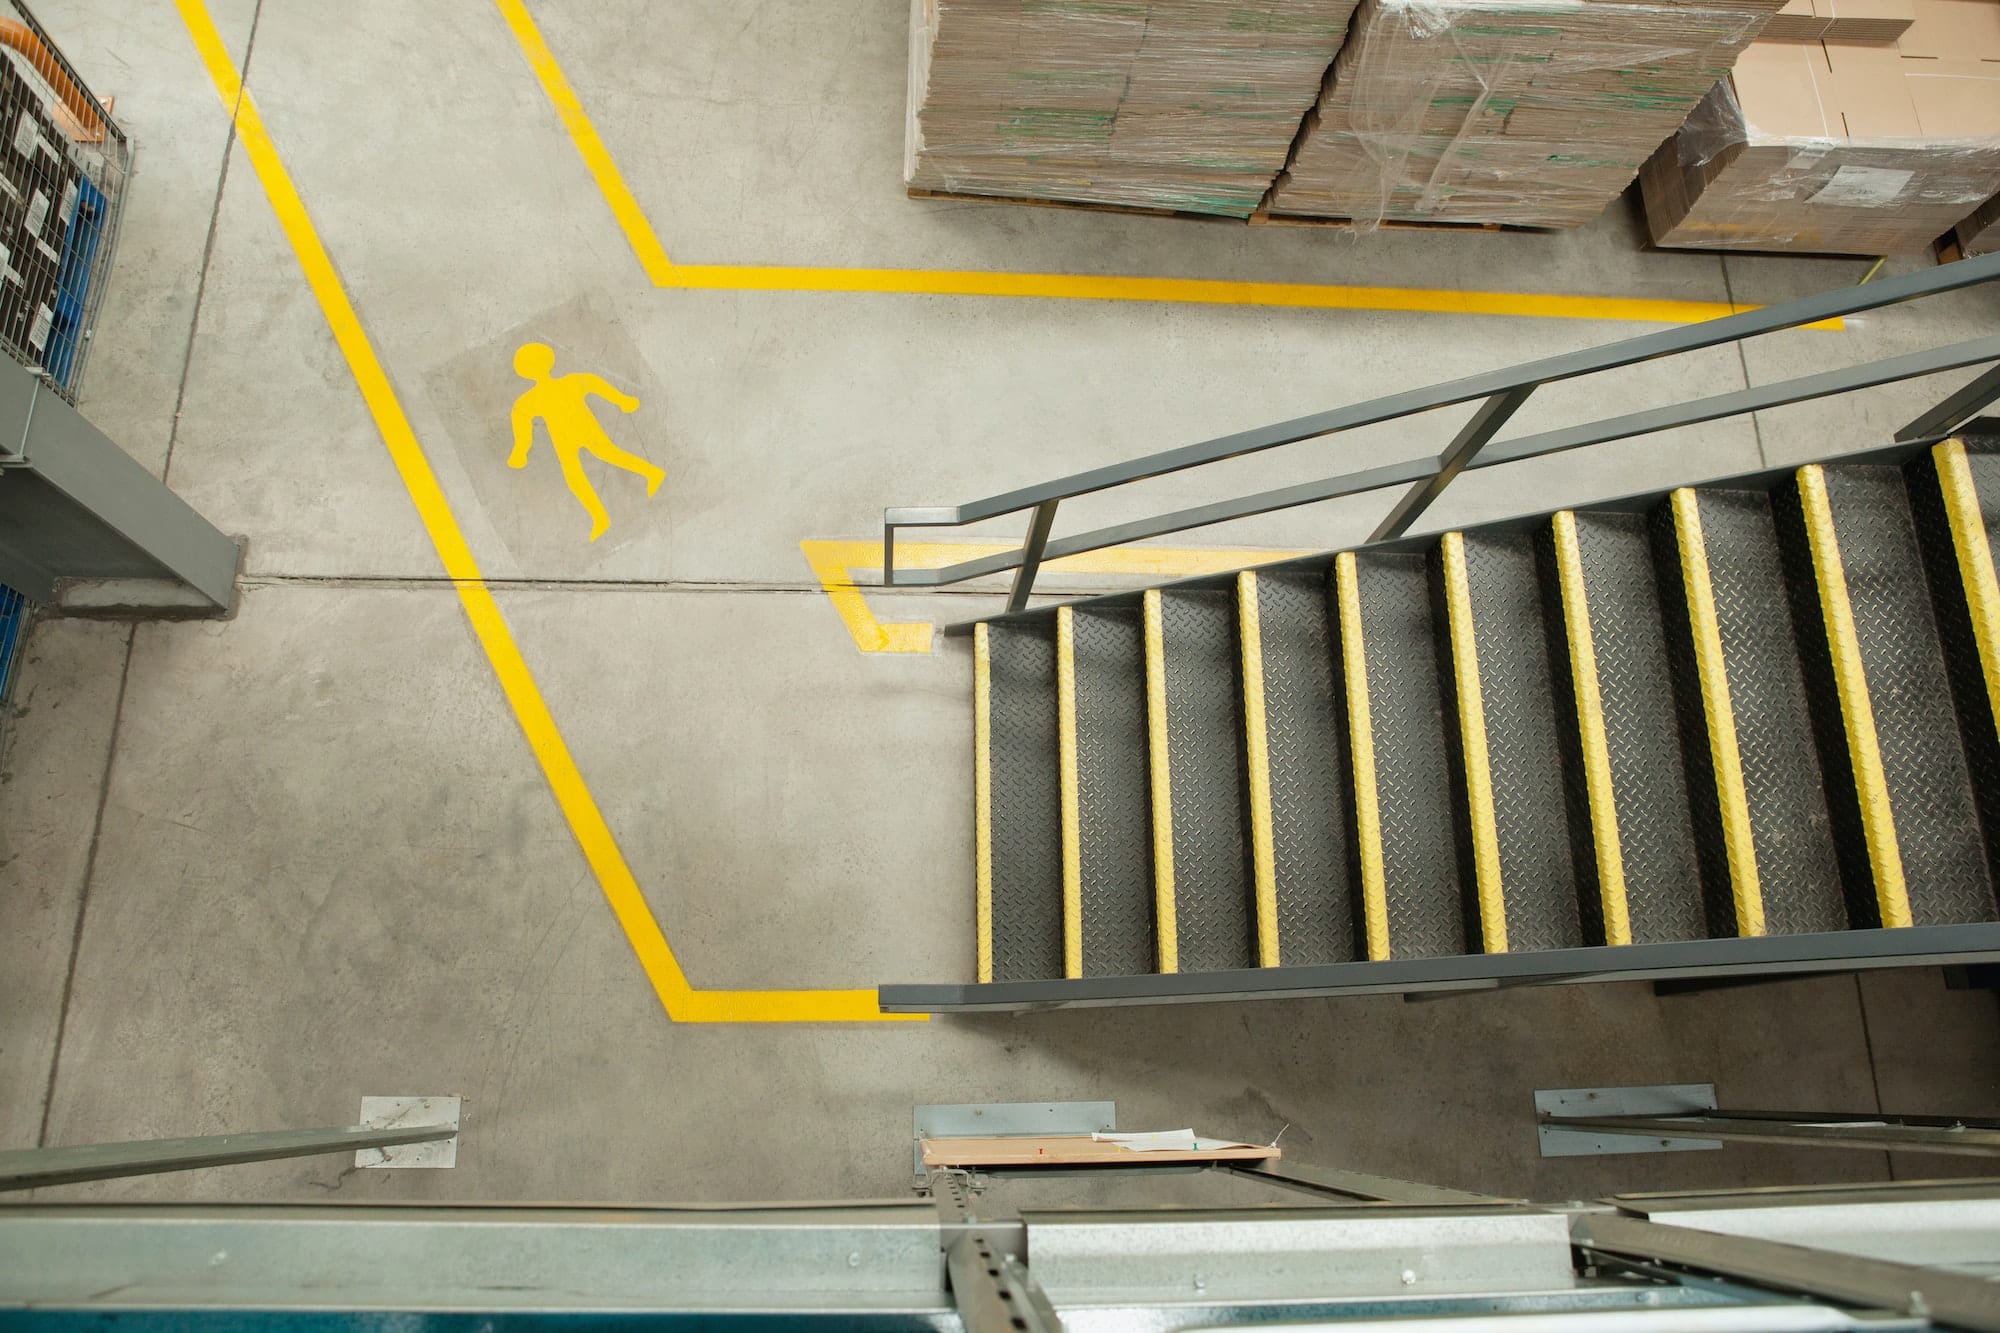 Steps and yellow lines in warehouse, elevated view